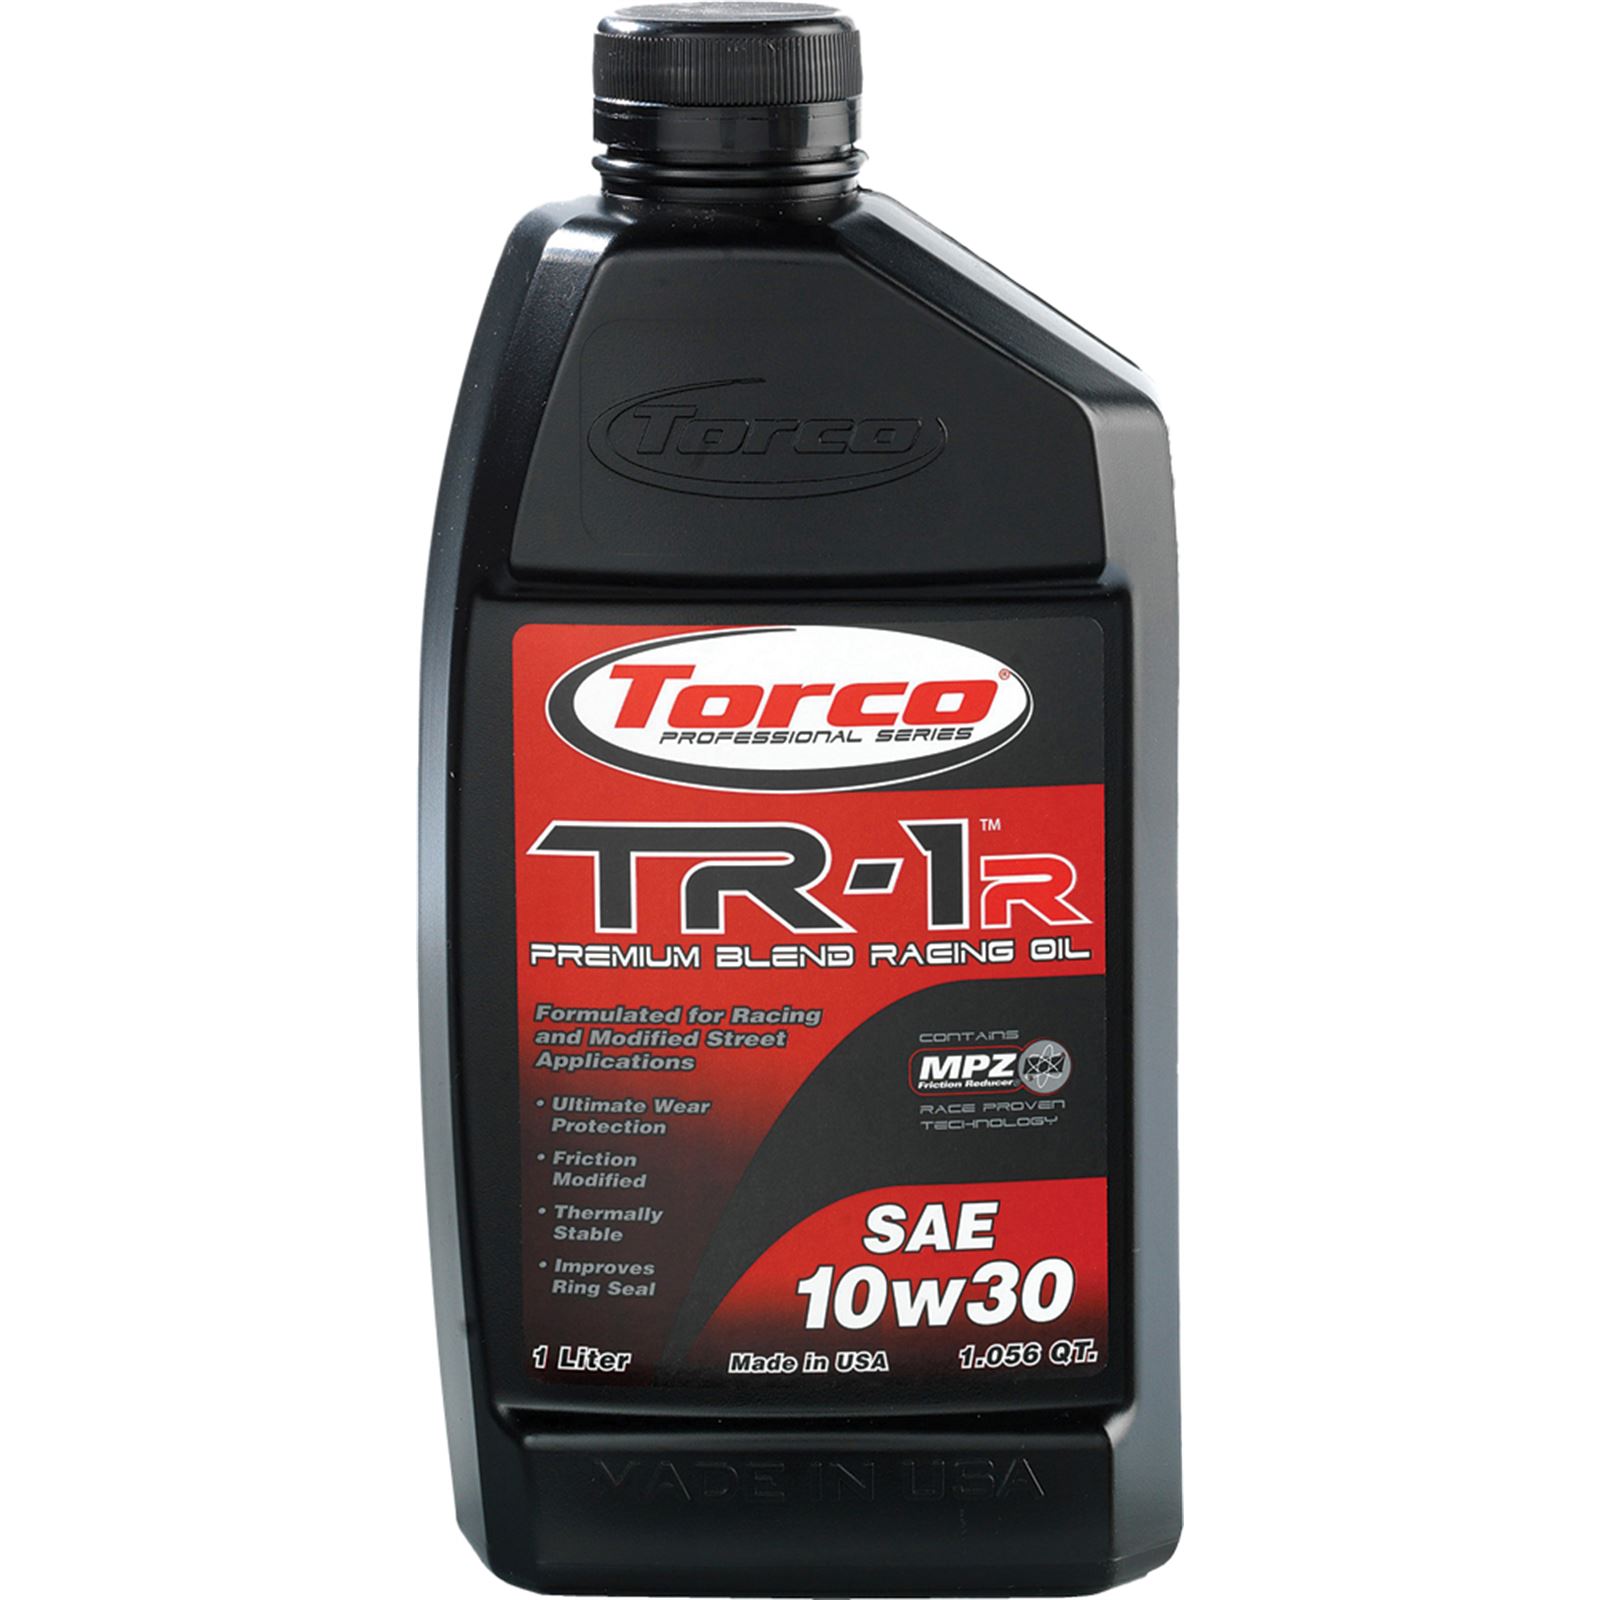 Torco TR-1 MPZ Motorcycle Engine Oil